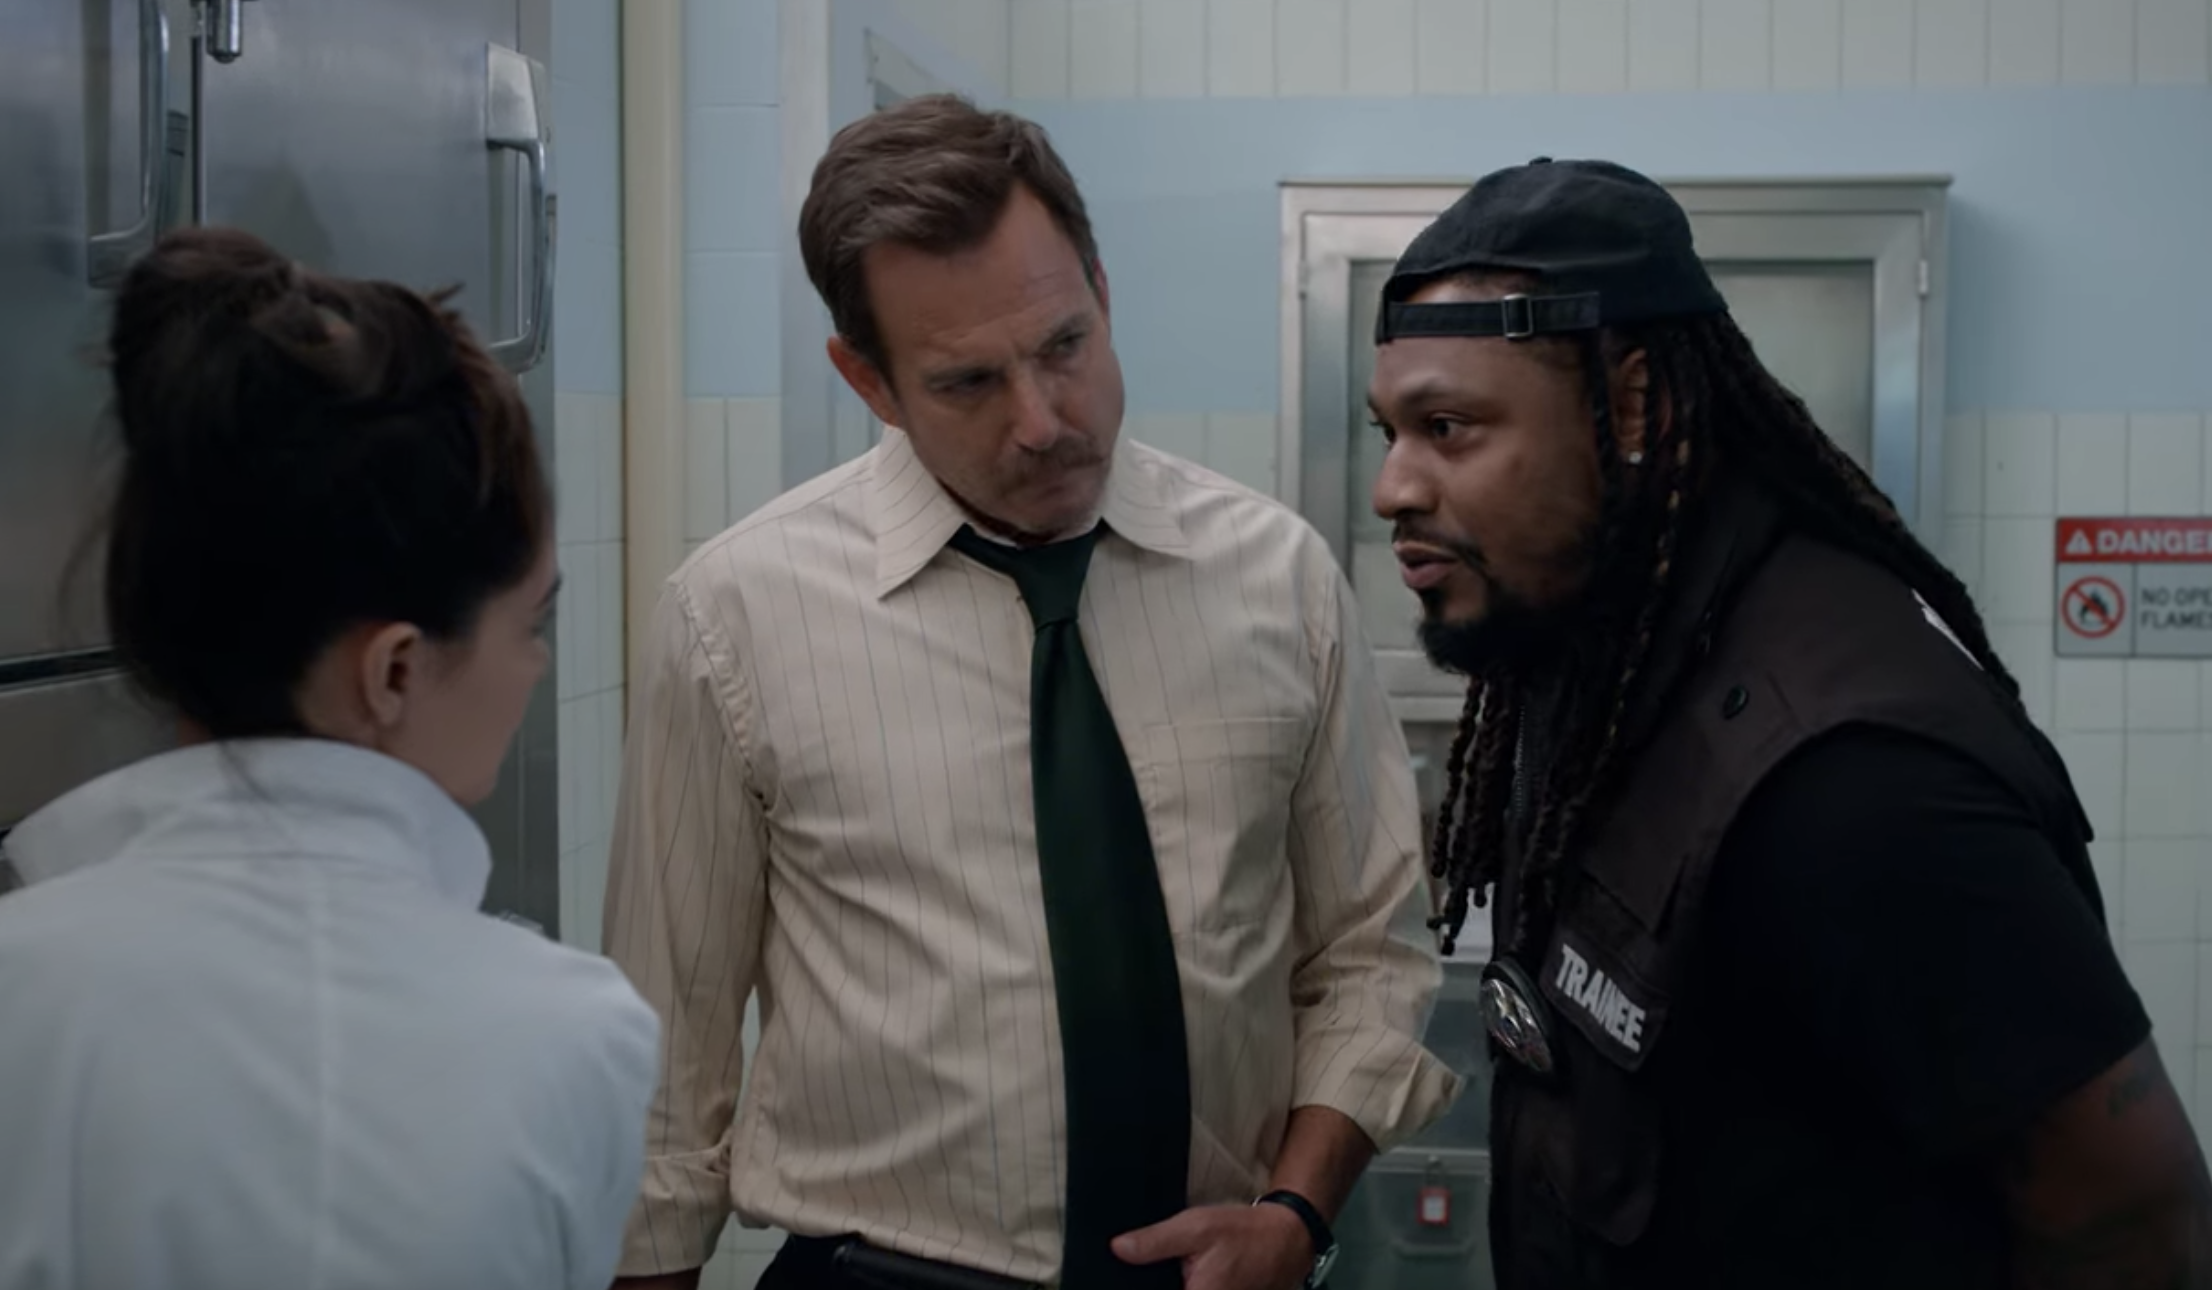 Detective Terry Seattle (Will Arnett) looks inquisitively at Marshawn Lynch